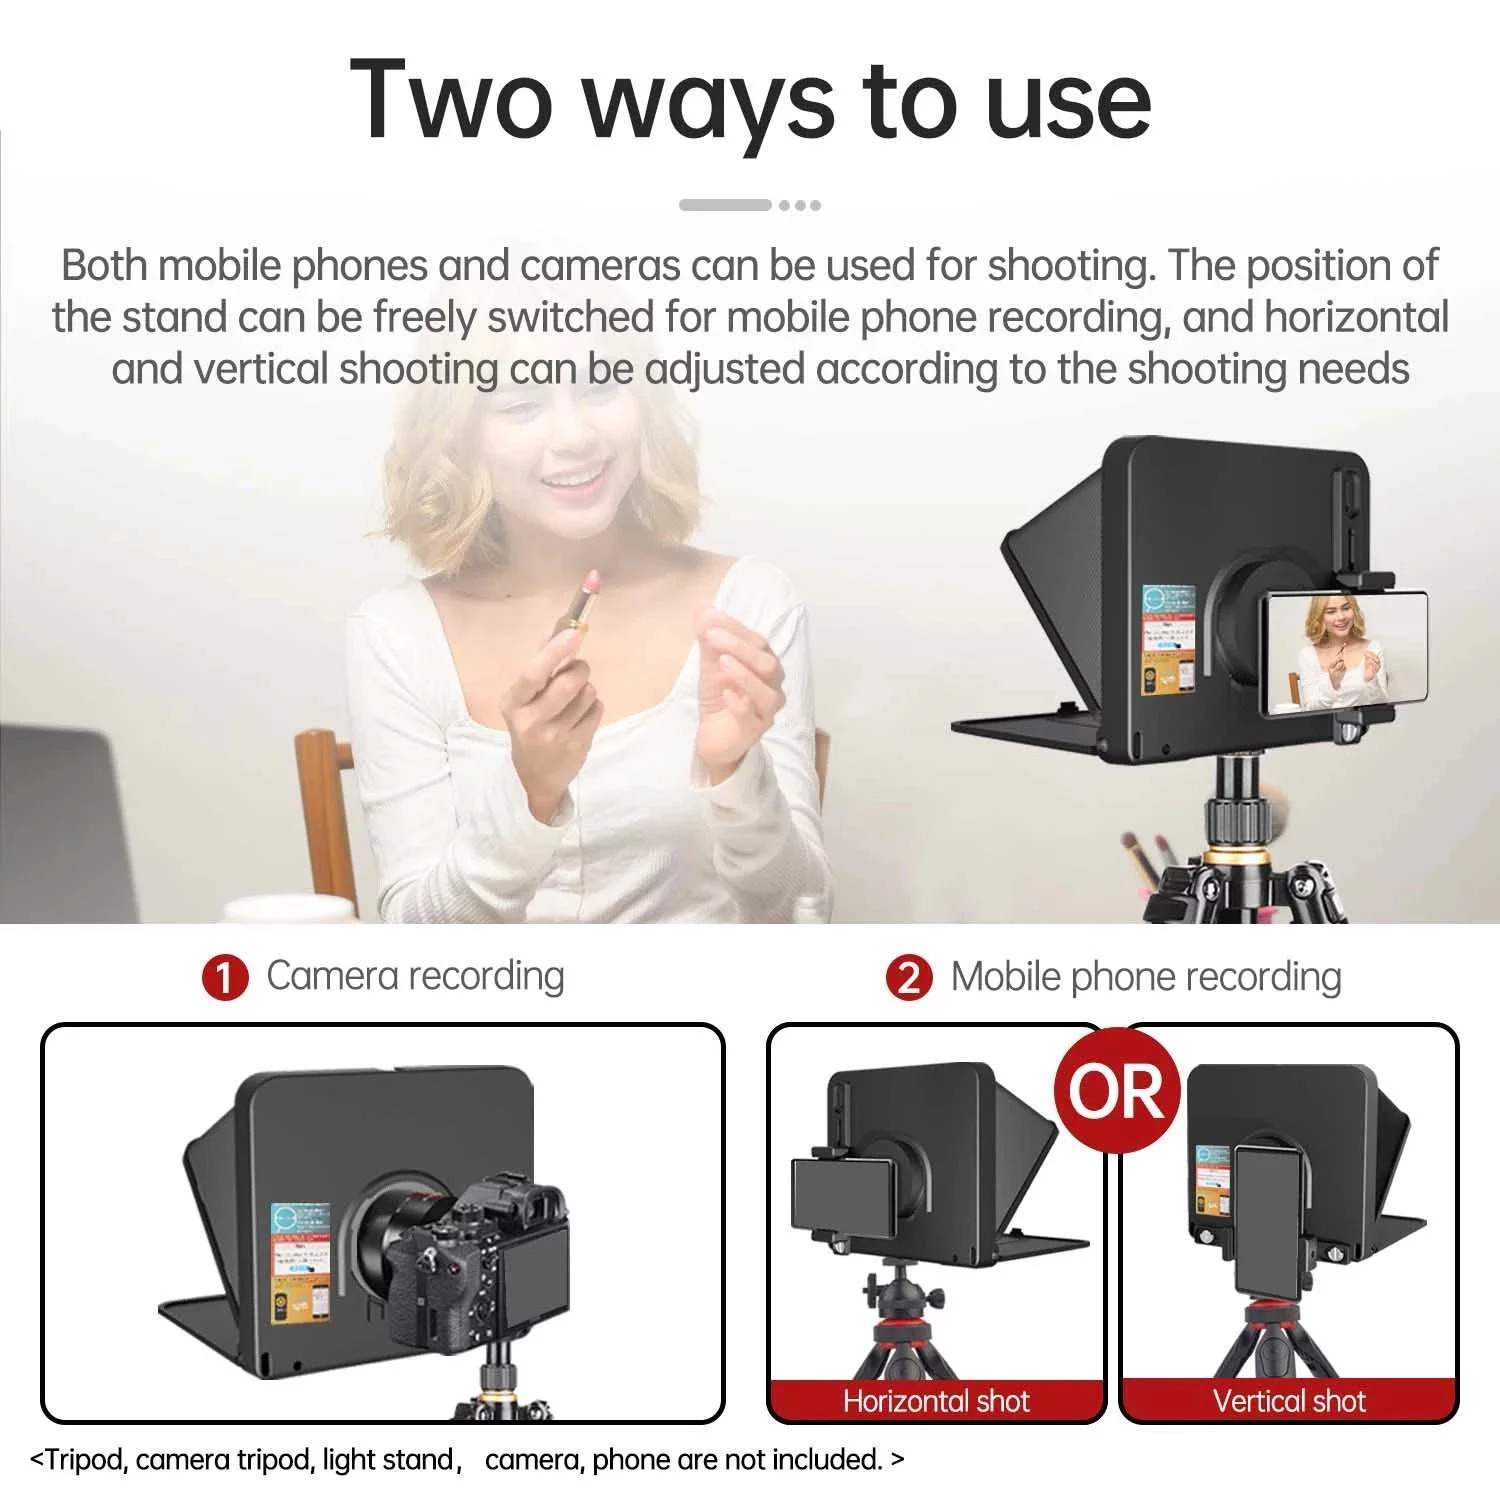 CamKoo CT2 Teleprompters for iPad Smartphone Tablets DSLR Cameras Adjustable APP Compatible with iOS/Android Portable Teleprompter Kit with Remote Control & Lens Adapter Rings Making Live Streaming 